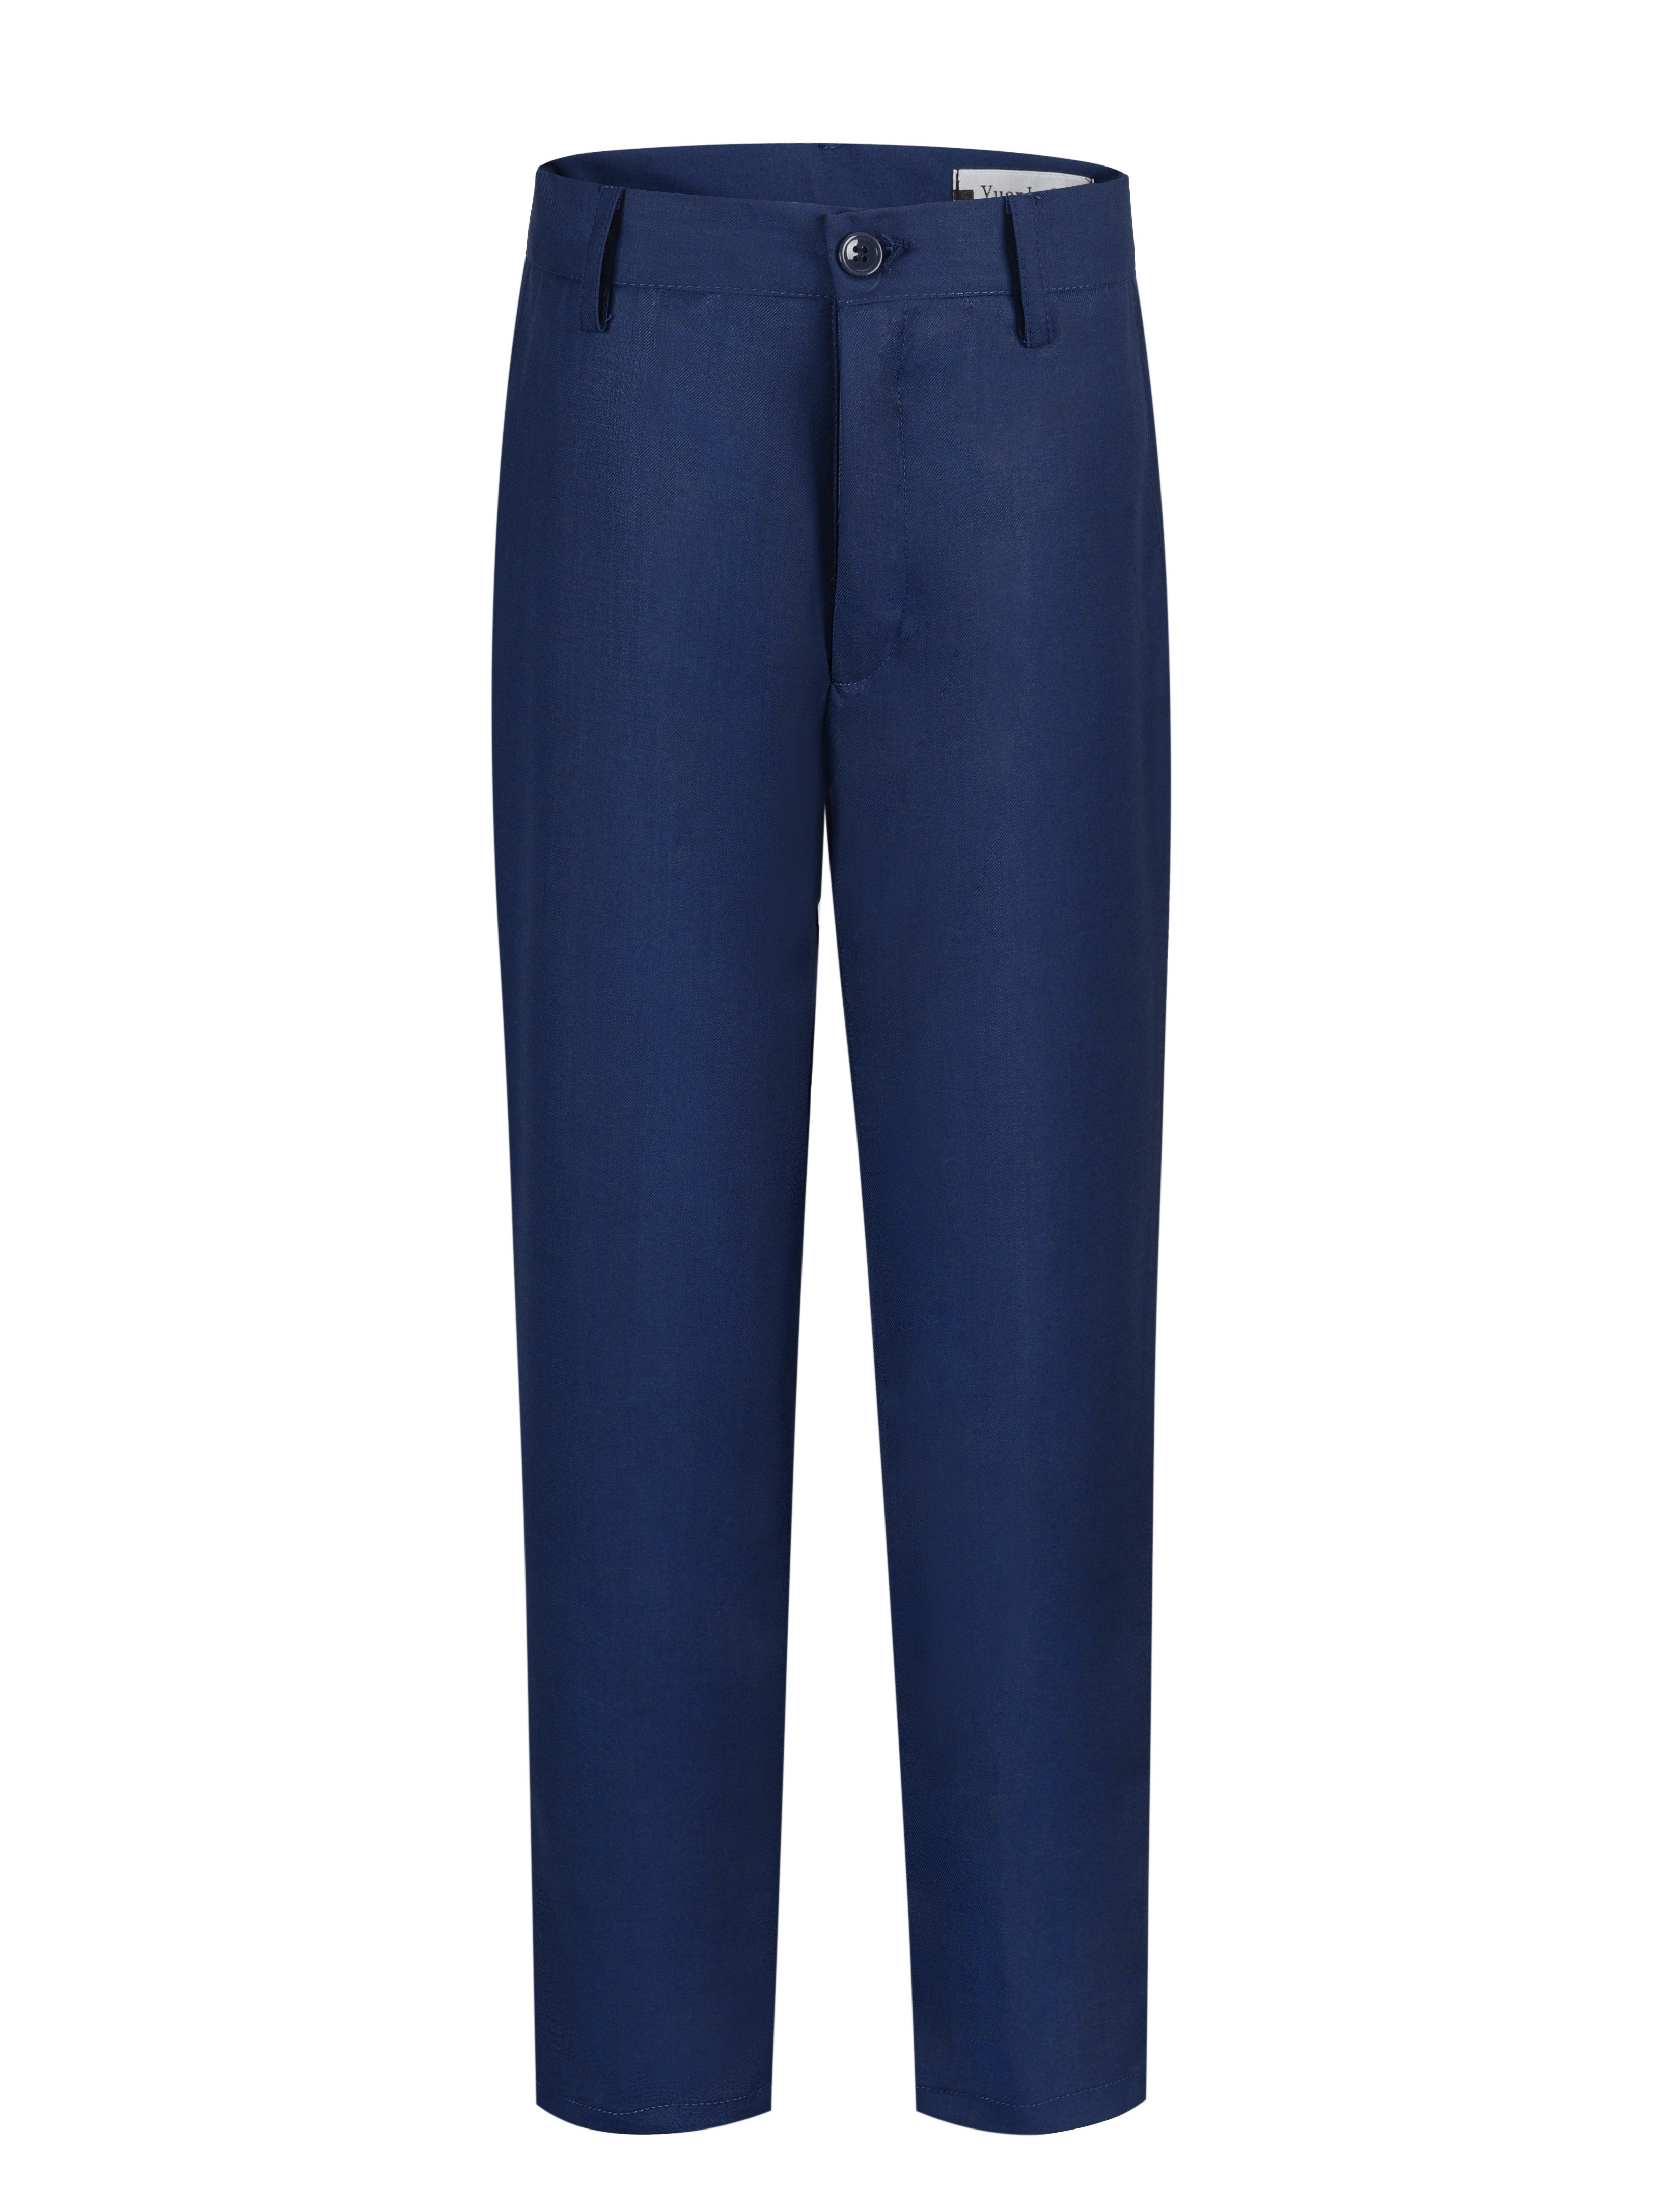 1905 Navy Collection Boys Solid Suit Separates Pants - All Suits & Suit  Separates | Jos A Bank